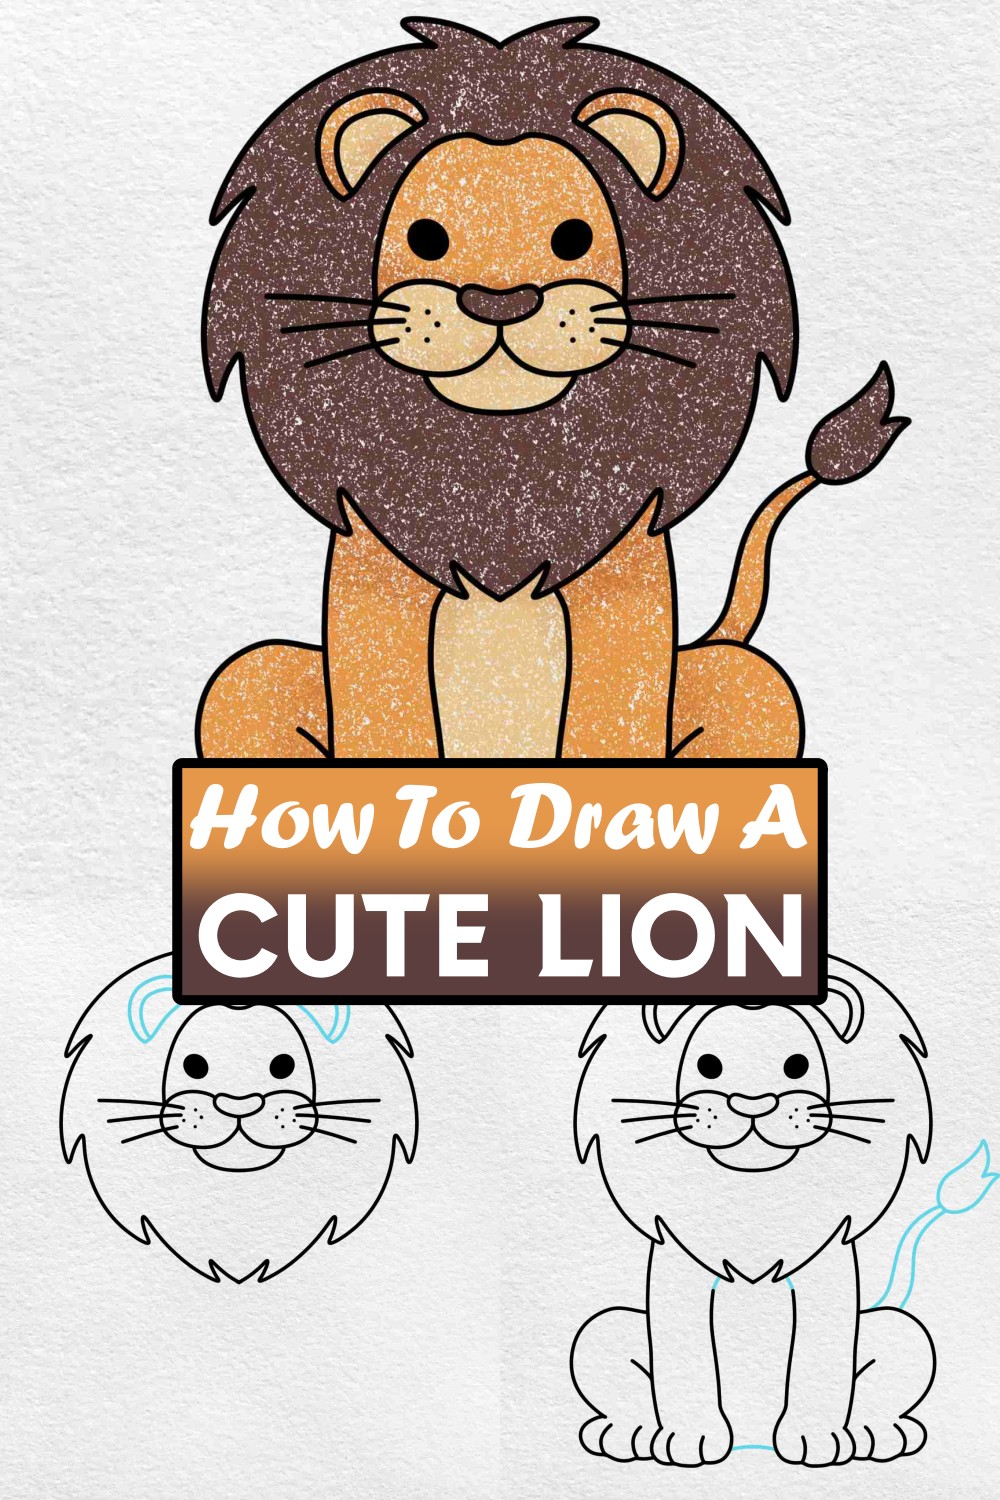 How To Draw A Cute Lion